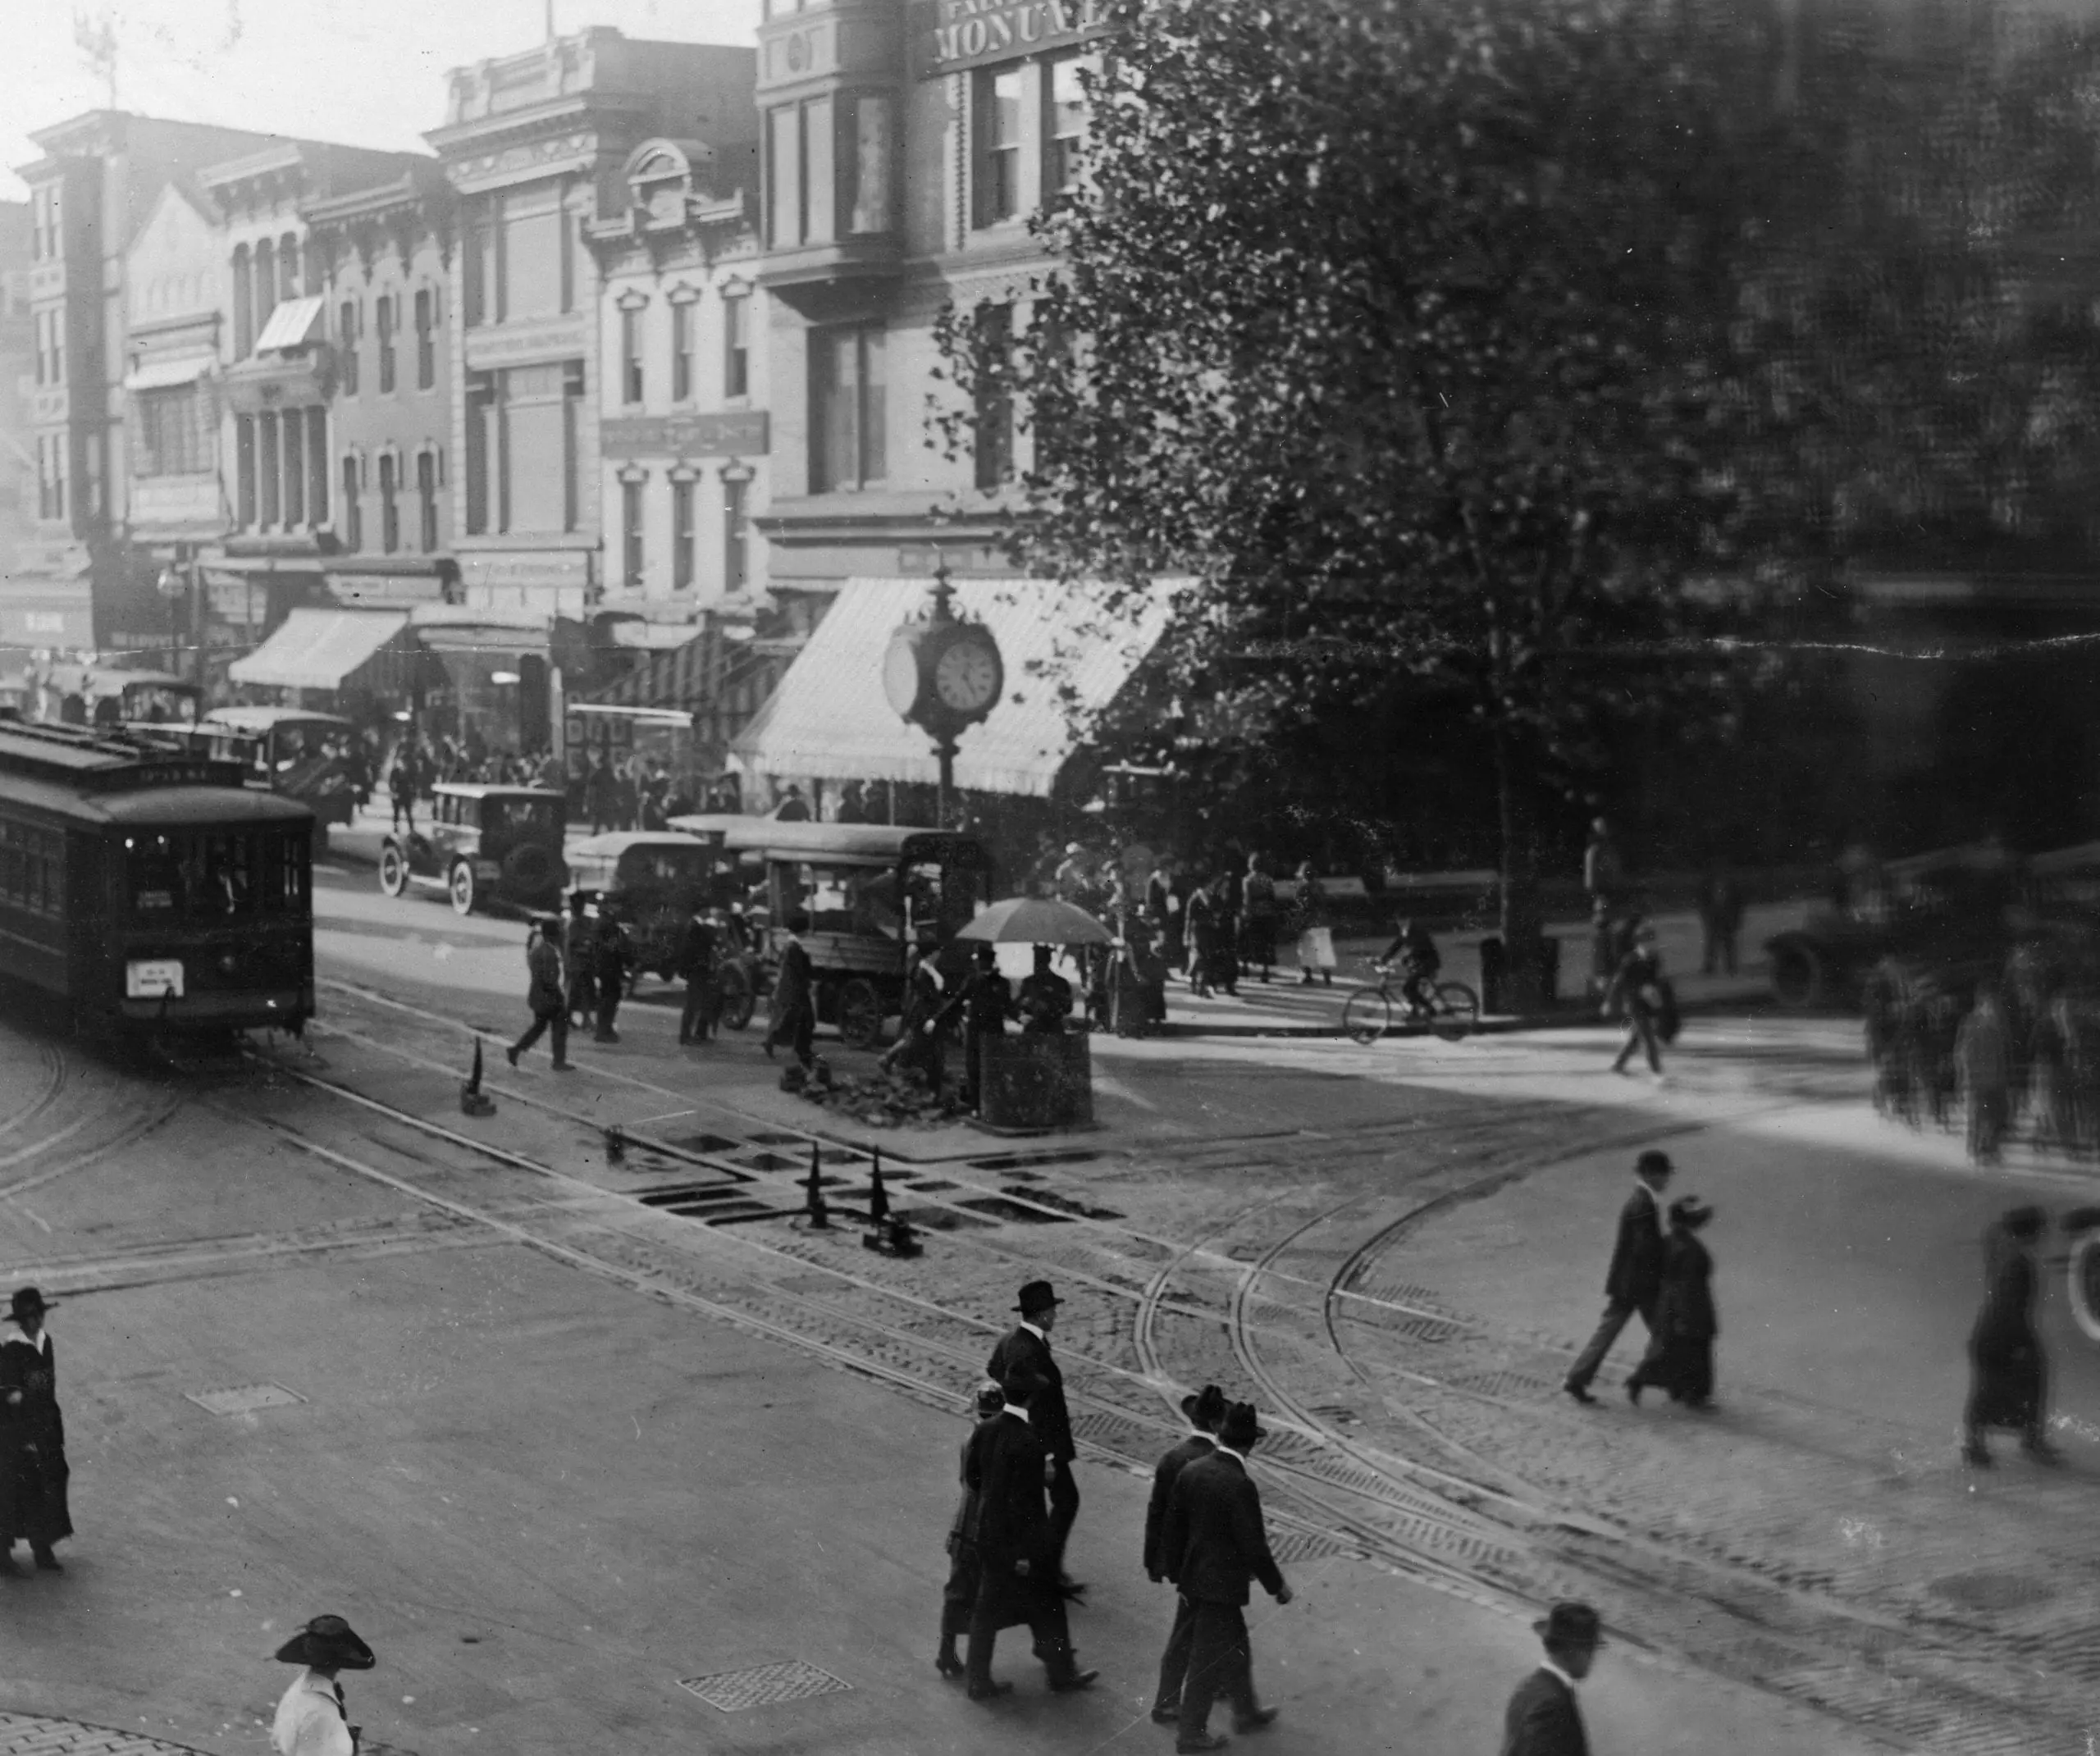 street scene at 11th and F St. in 1910s